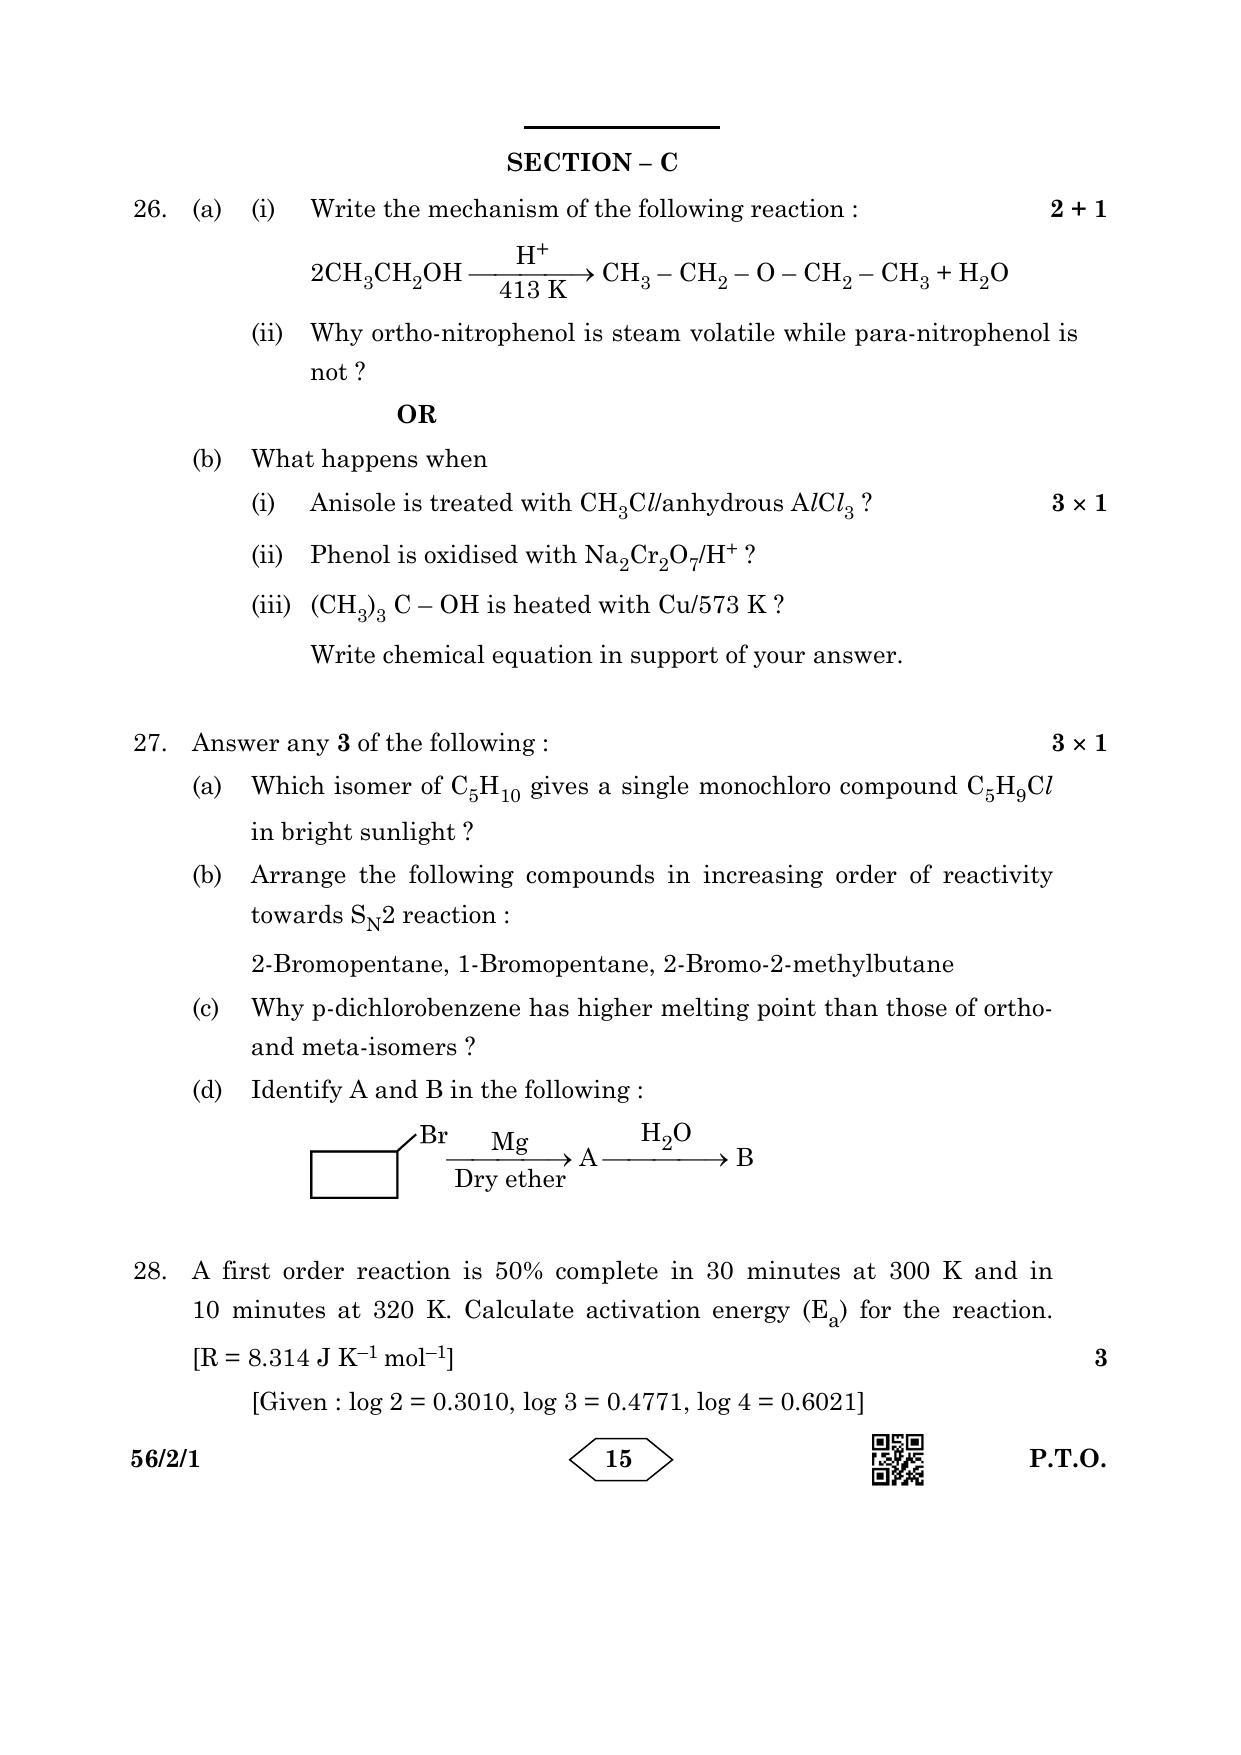 CBSE Class 12 56-2-1 Chemistry 2023 Question Paper - Page 15